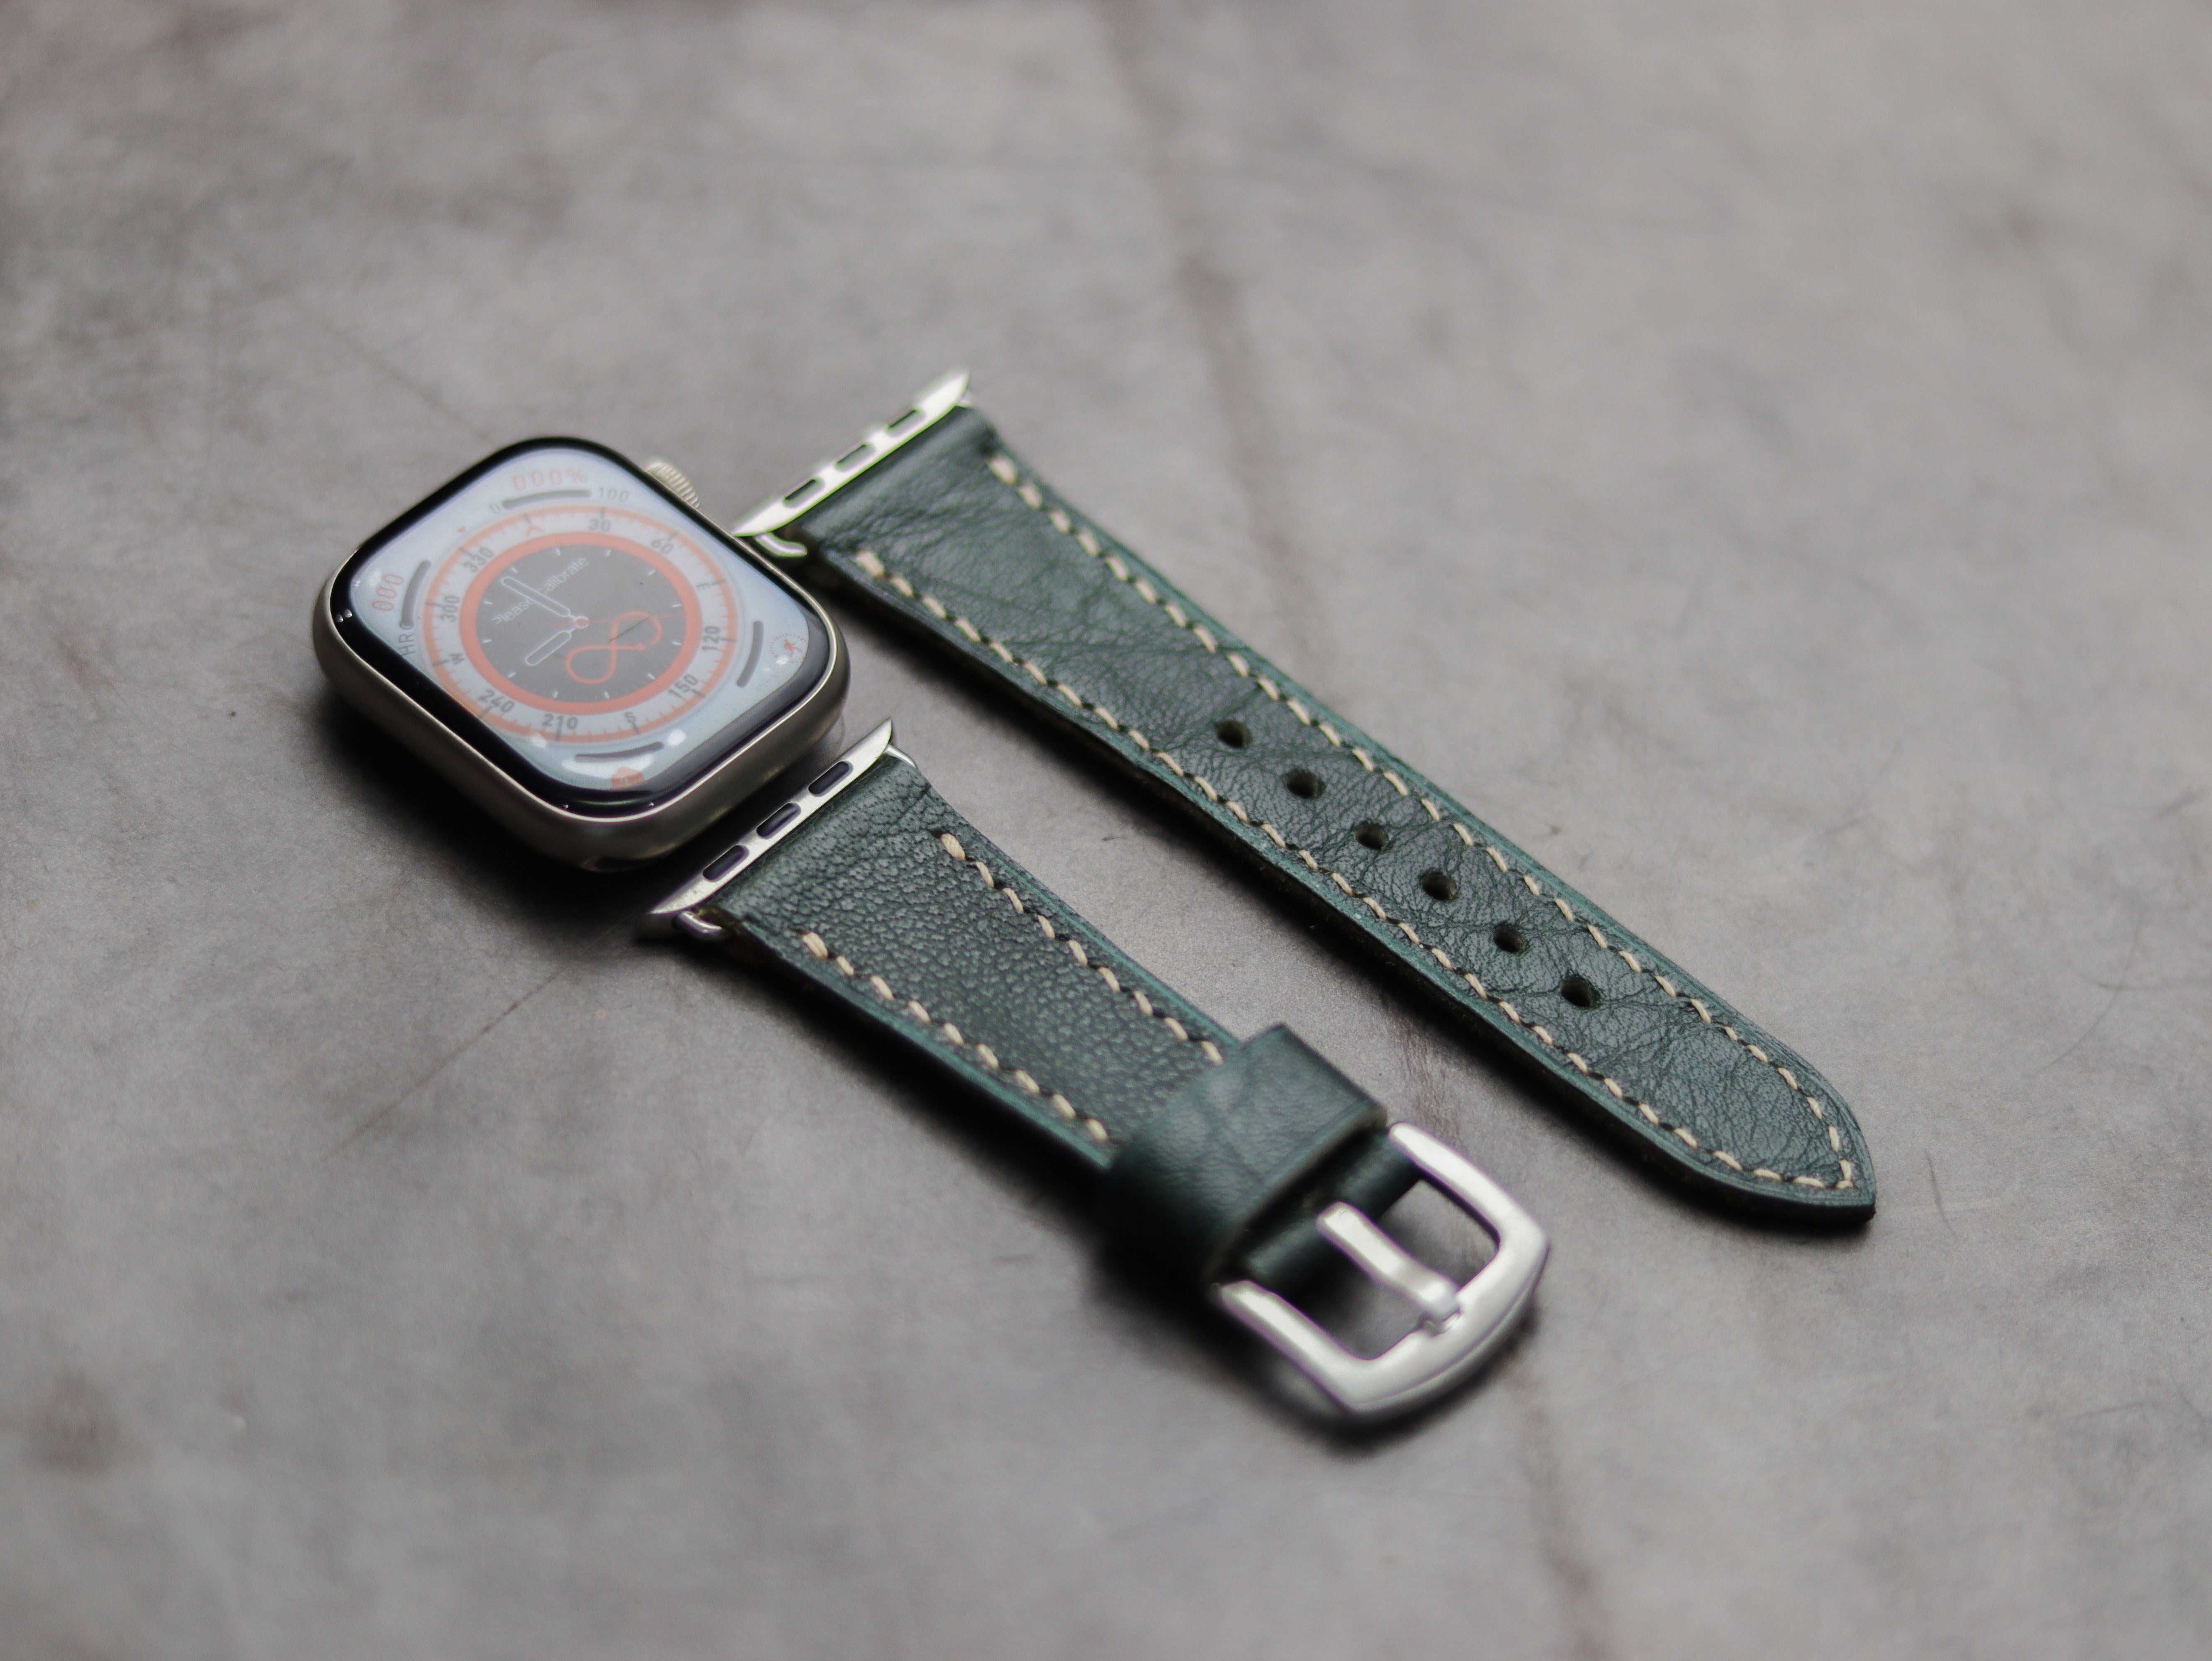 PINE GREEN LEATHER - APPLE WATCH STRAPS HAND-CRAFTED